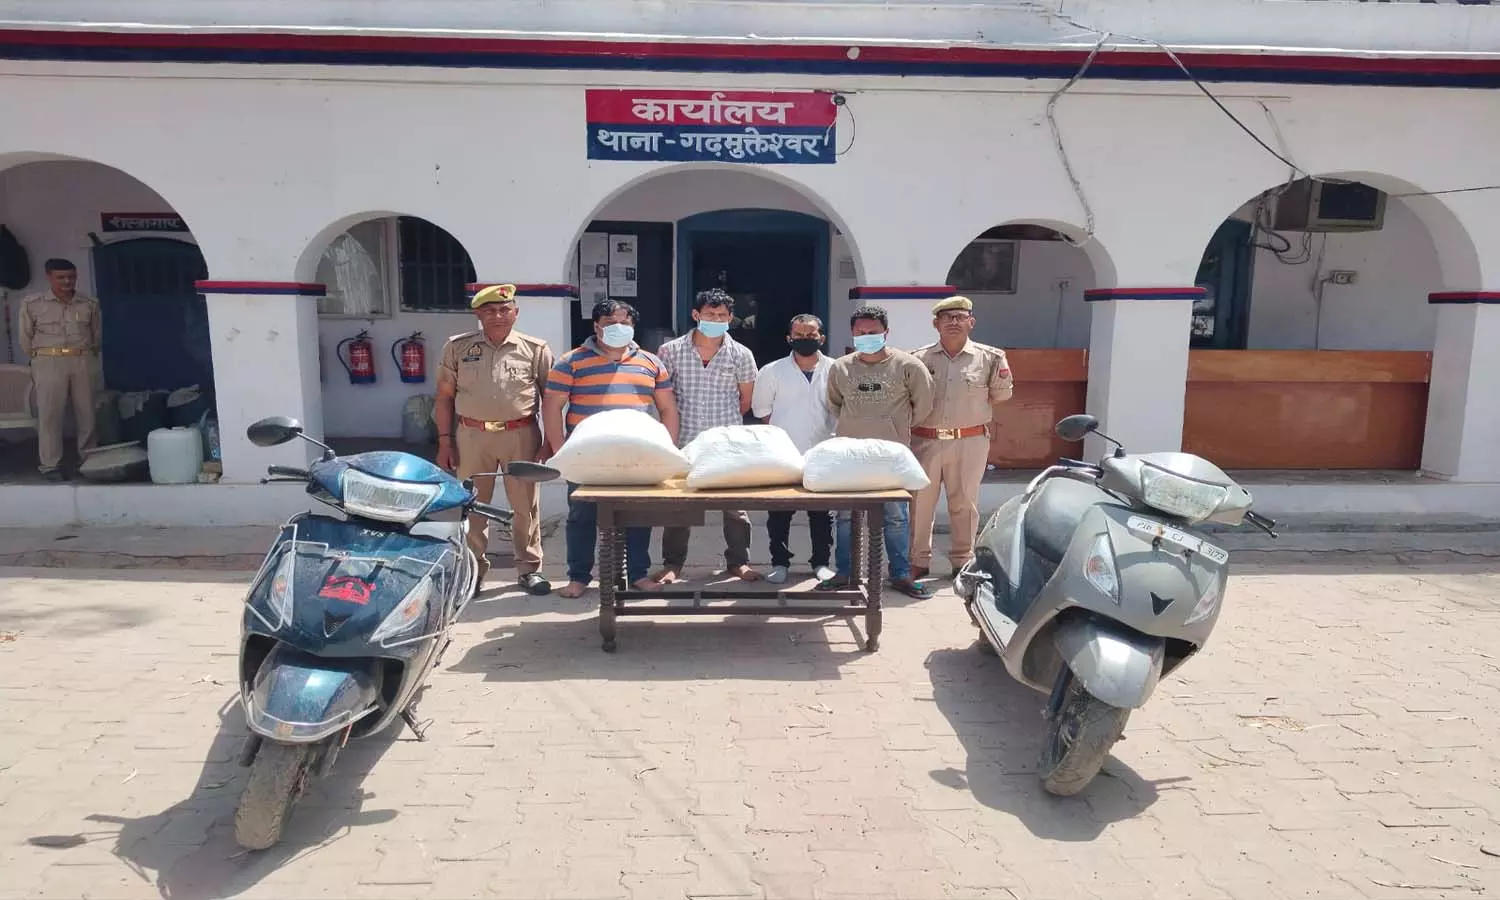 Four interstate ganja smugglers arrested, were supplying on scooter, caught by police after siege